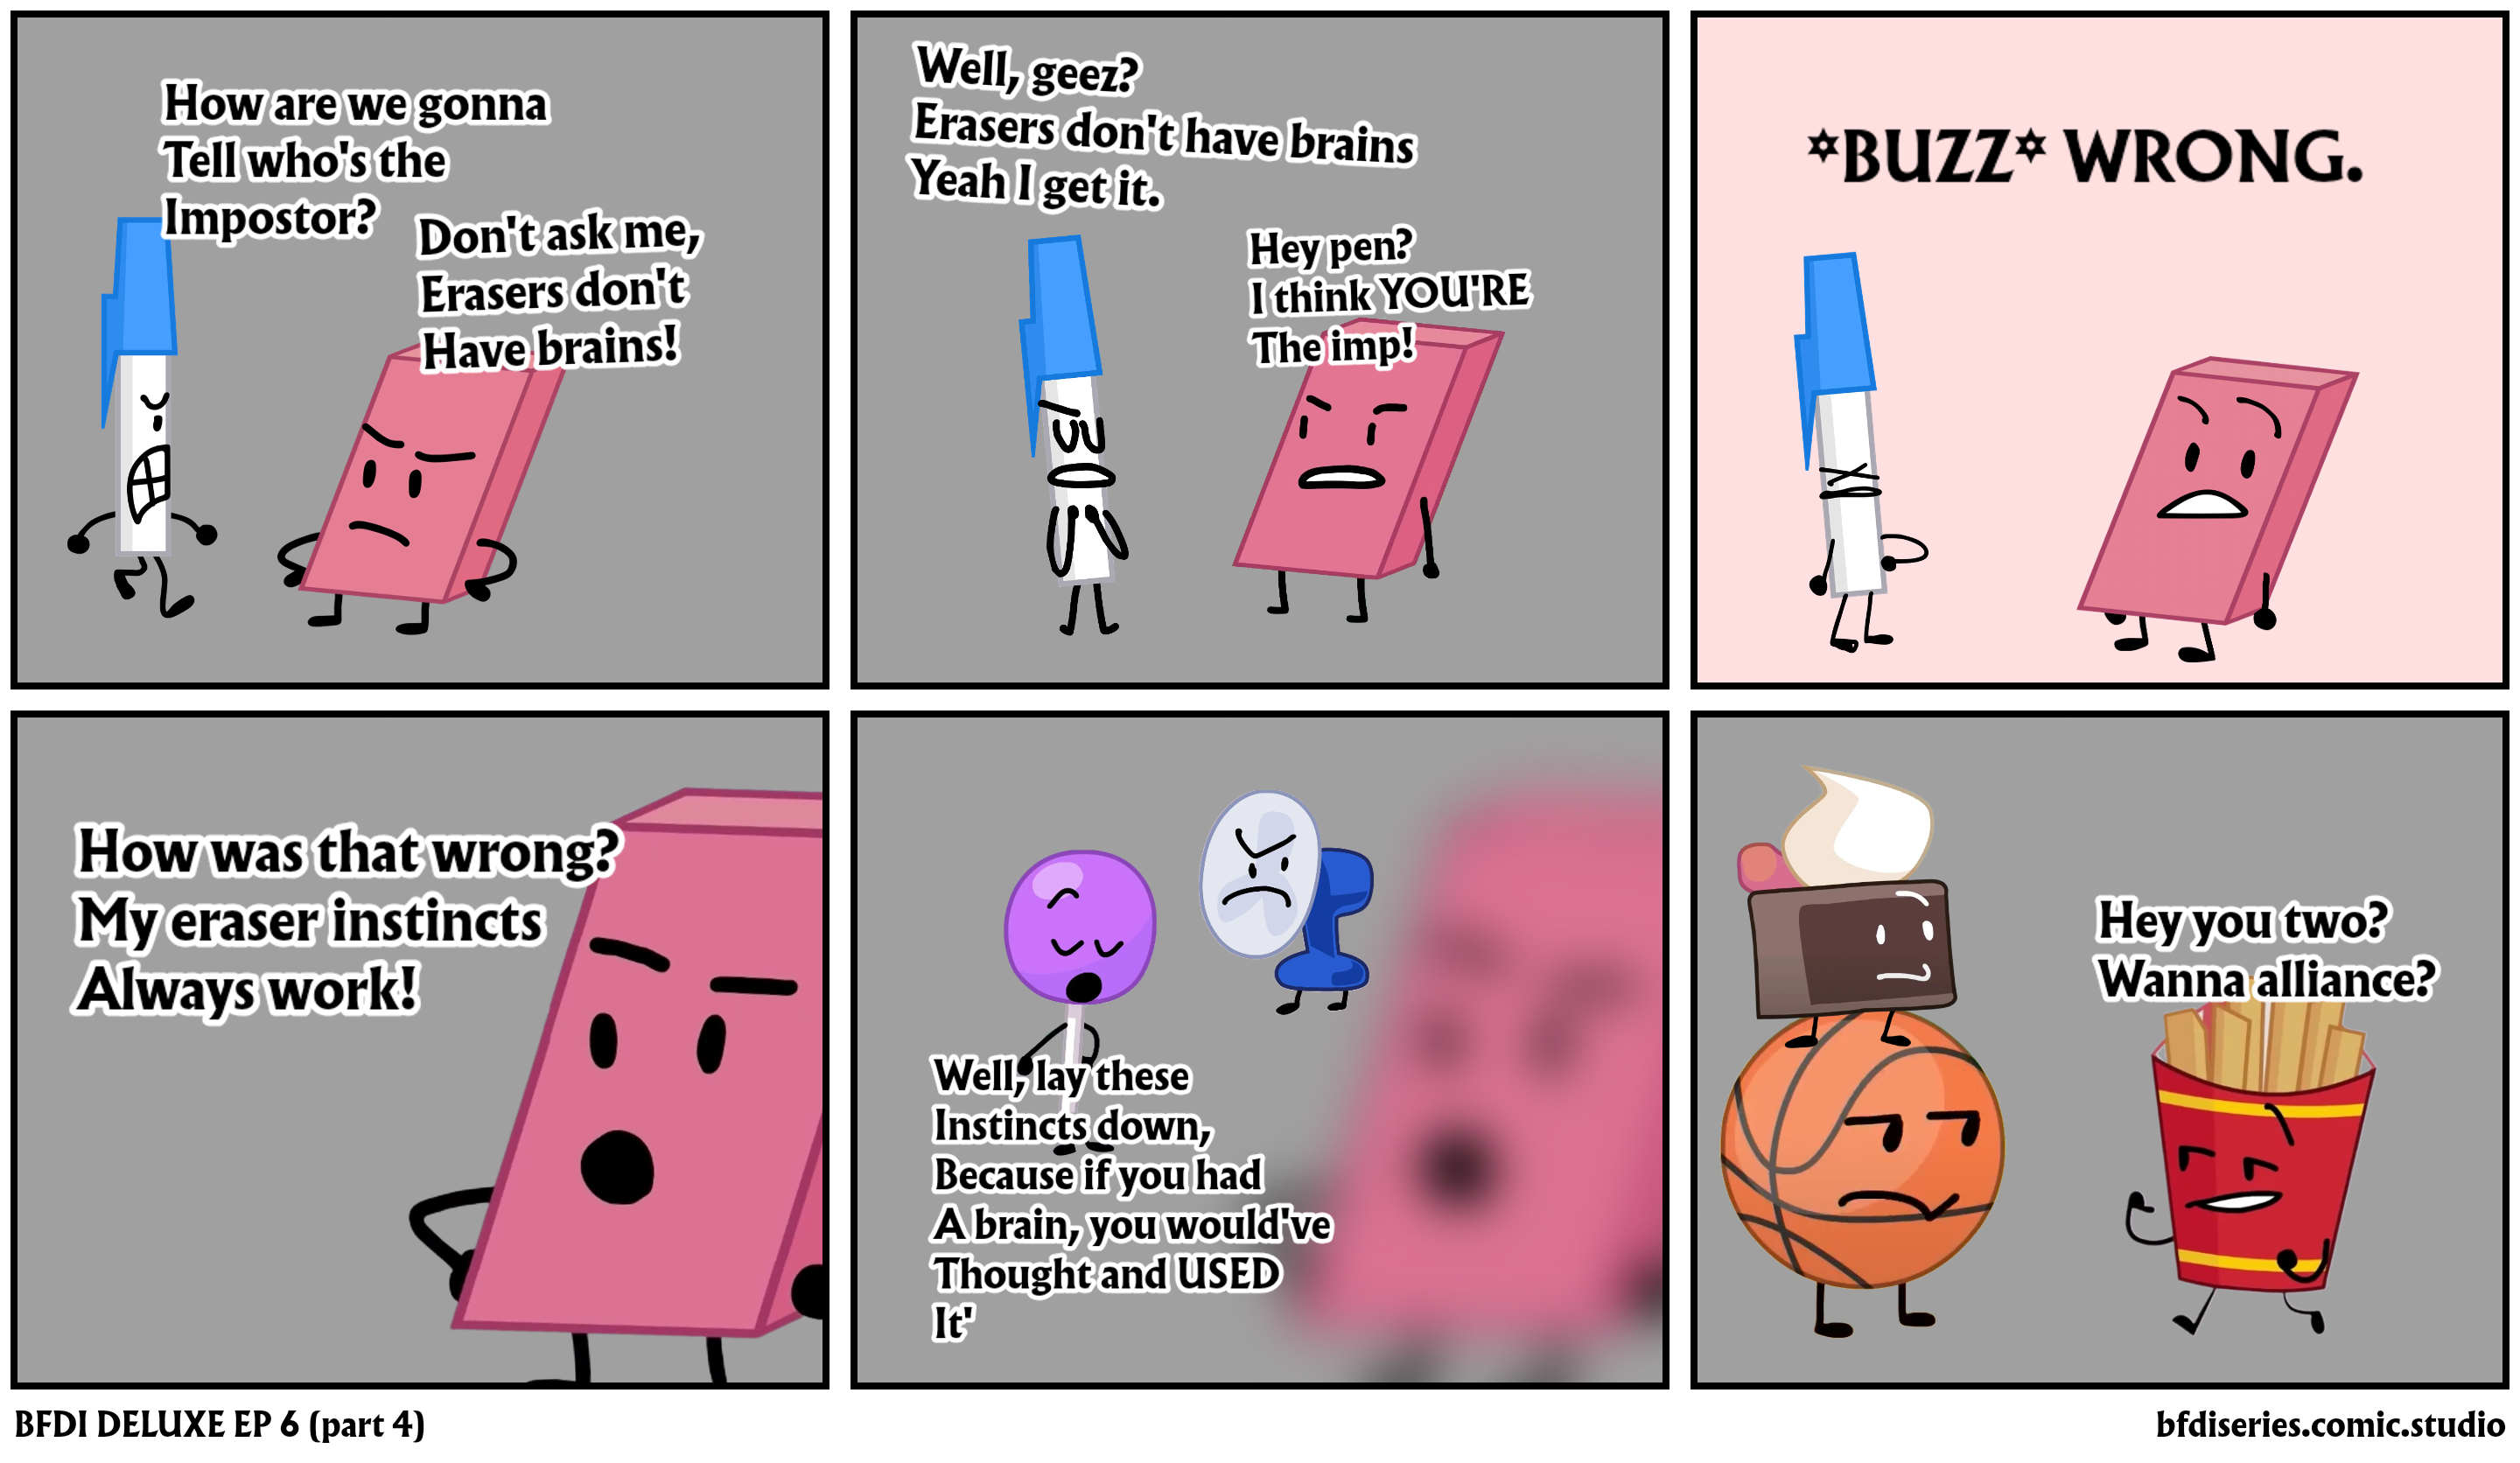 BFDI DELUXE EP 6 (part 4)